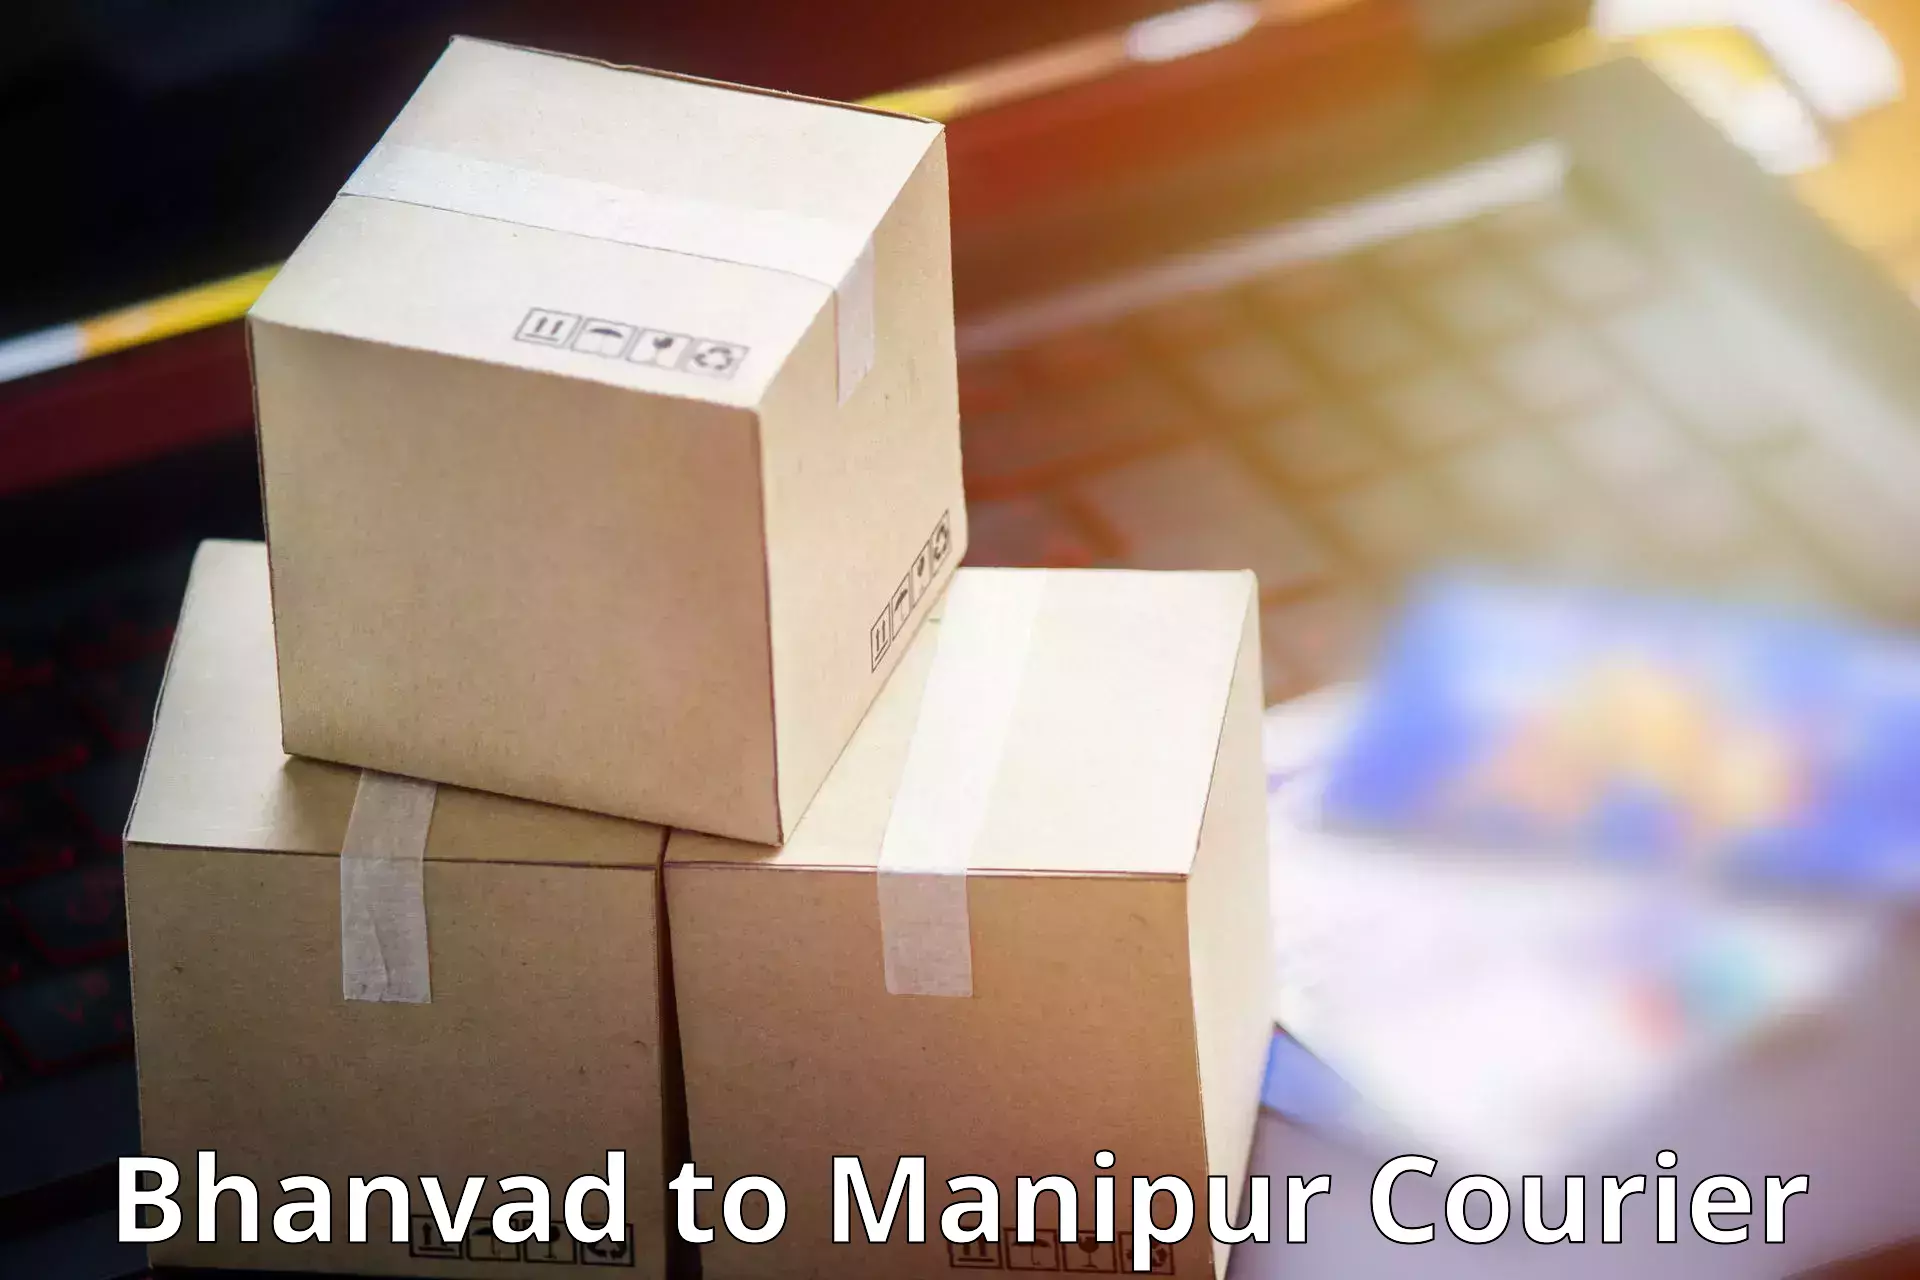 Easy access courier services Bhanvad to Imphal